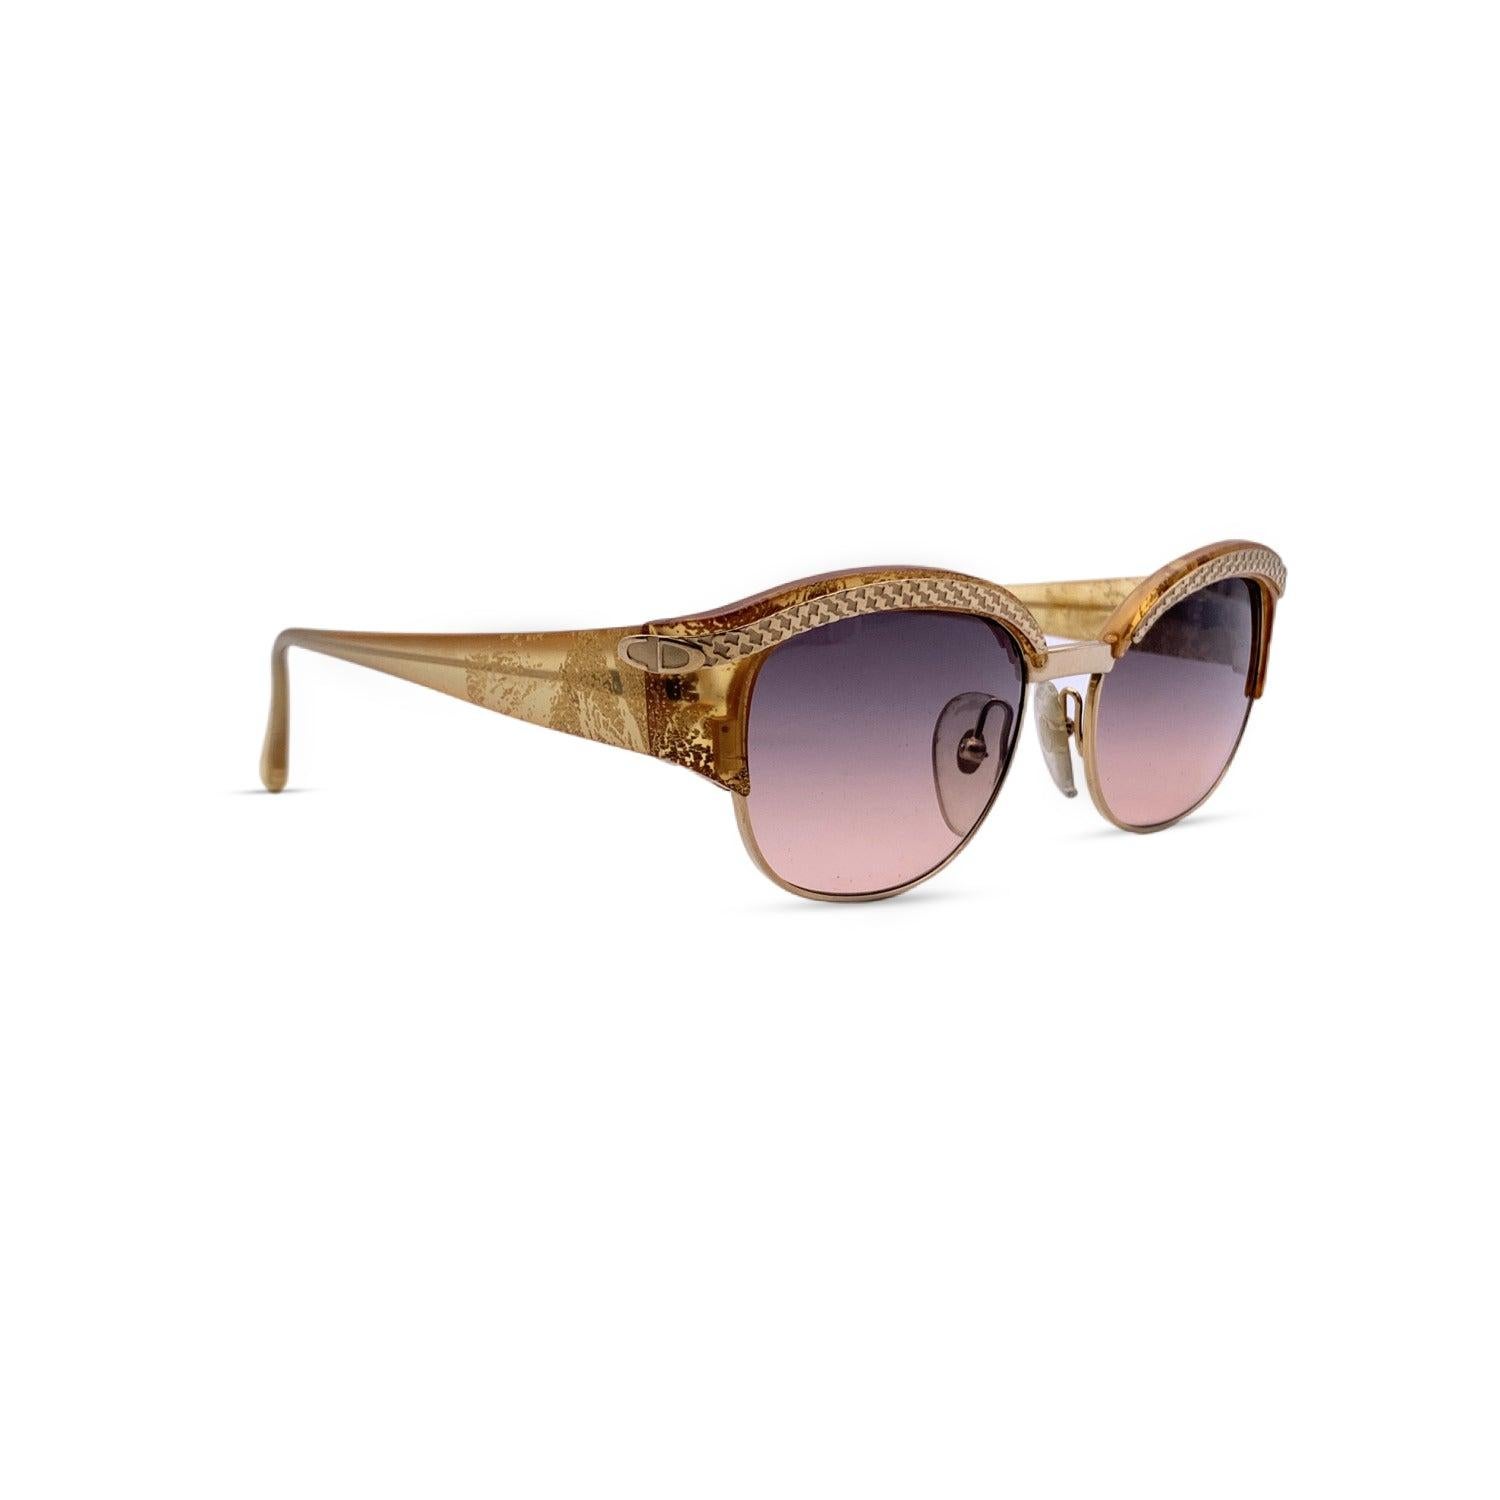 Christian Dior Vintage Women Sunglasses 2589 44 Optyl 55/18 130mm In Excellent Condition For Sale In Rome, Rome